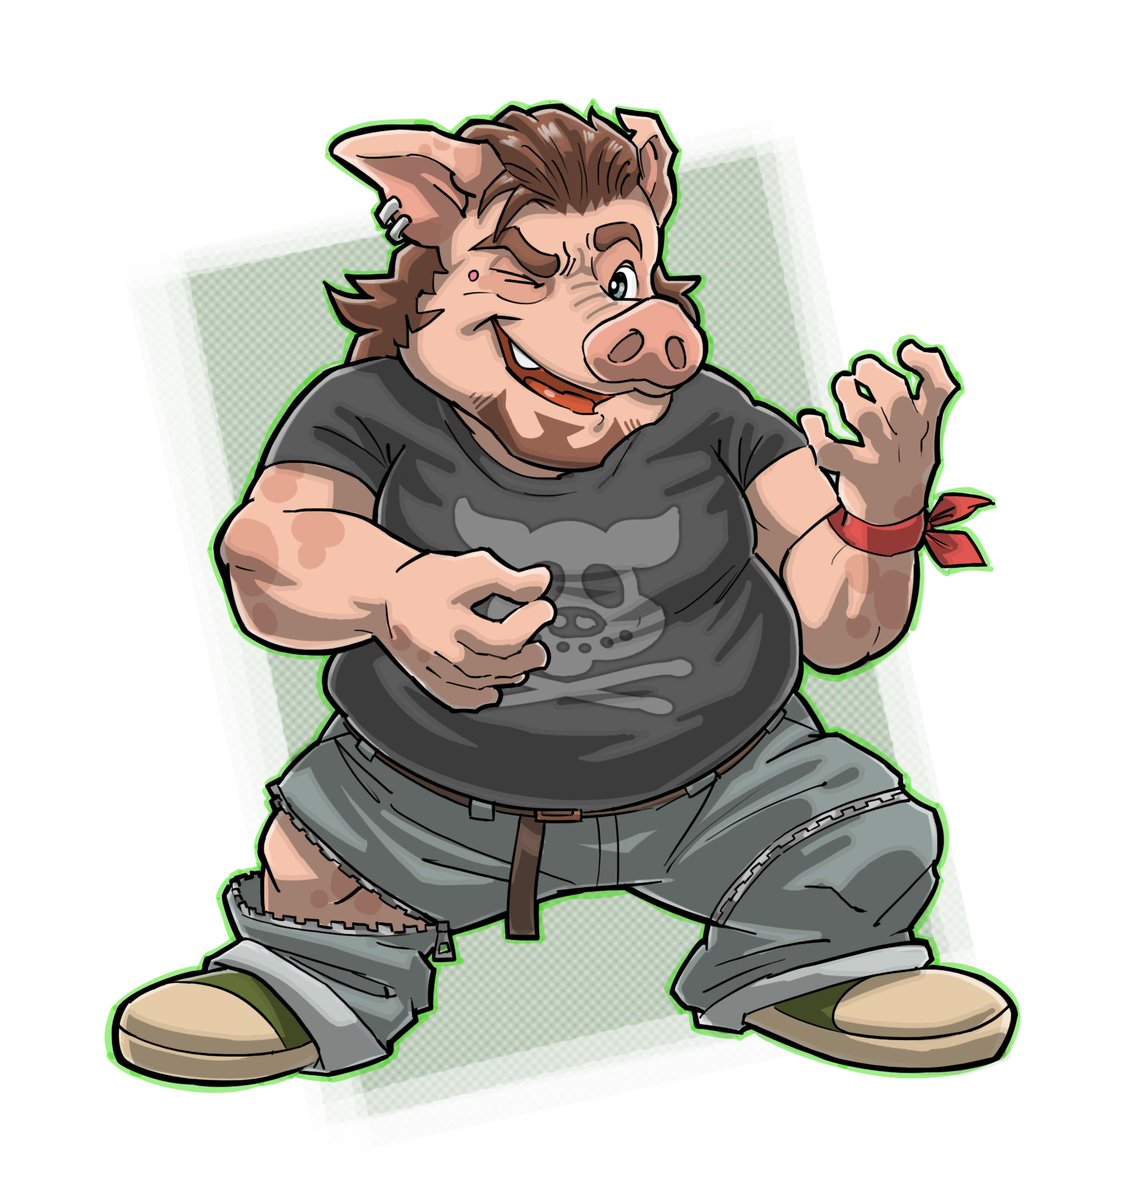 hello! I haven't posted anything new for a while due to work, but I managed to find some free time this weekend to draw this pig playing the air guitar! hope you like it! 🐷🎸🎶 #originalcharacter #furry #anthro #pig #airguitar